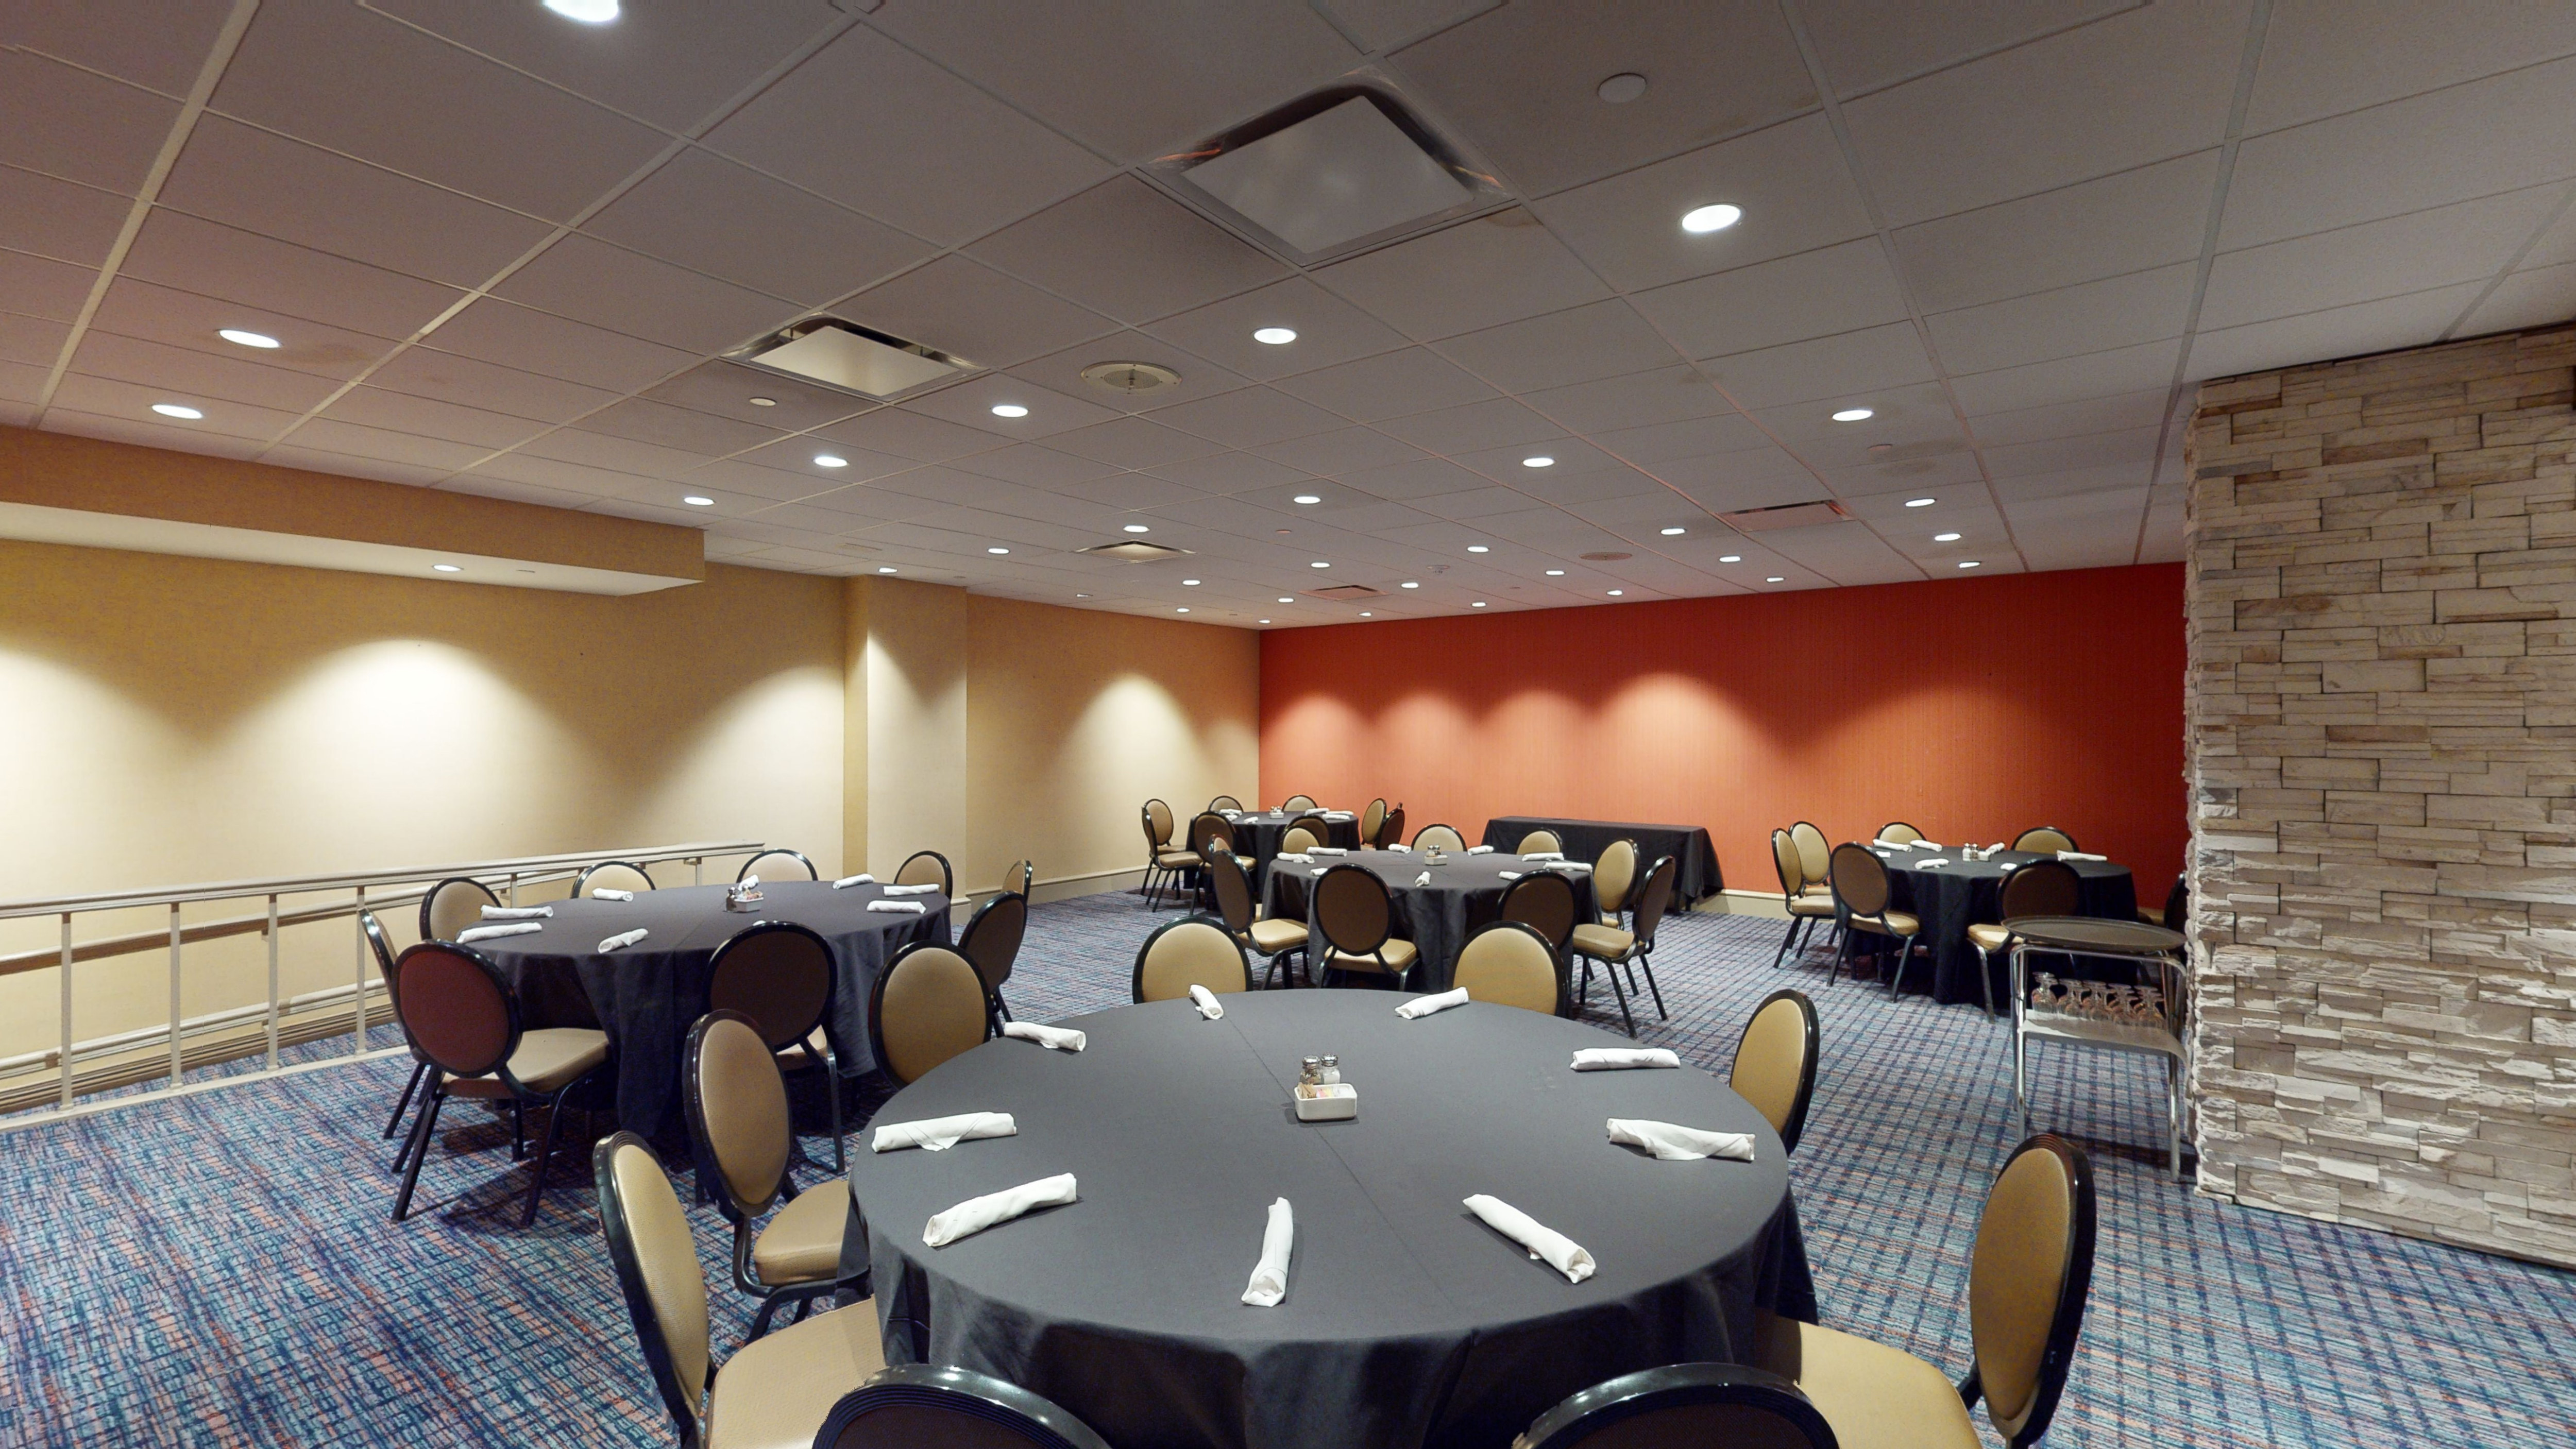 Meeting Room with round tables and chairs